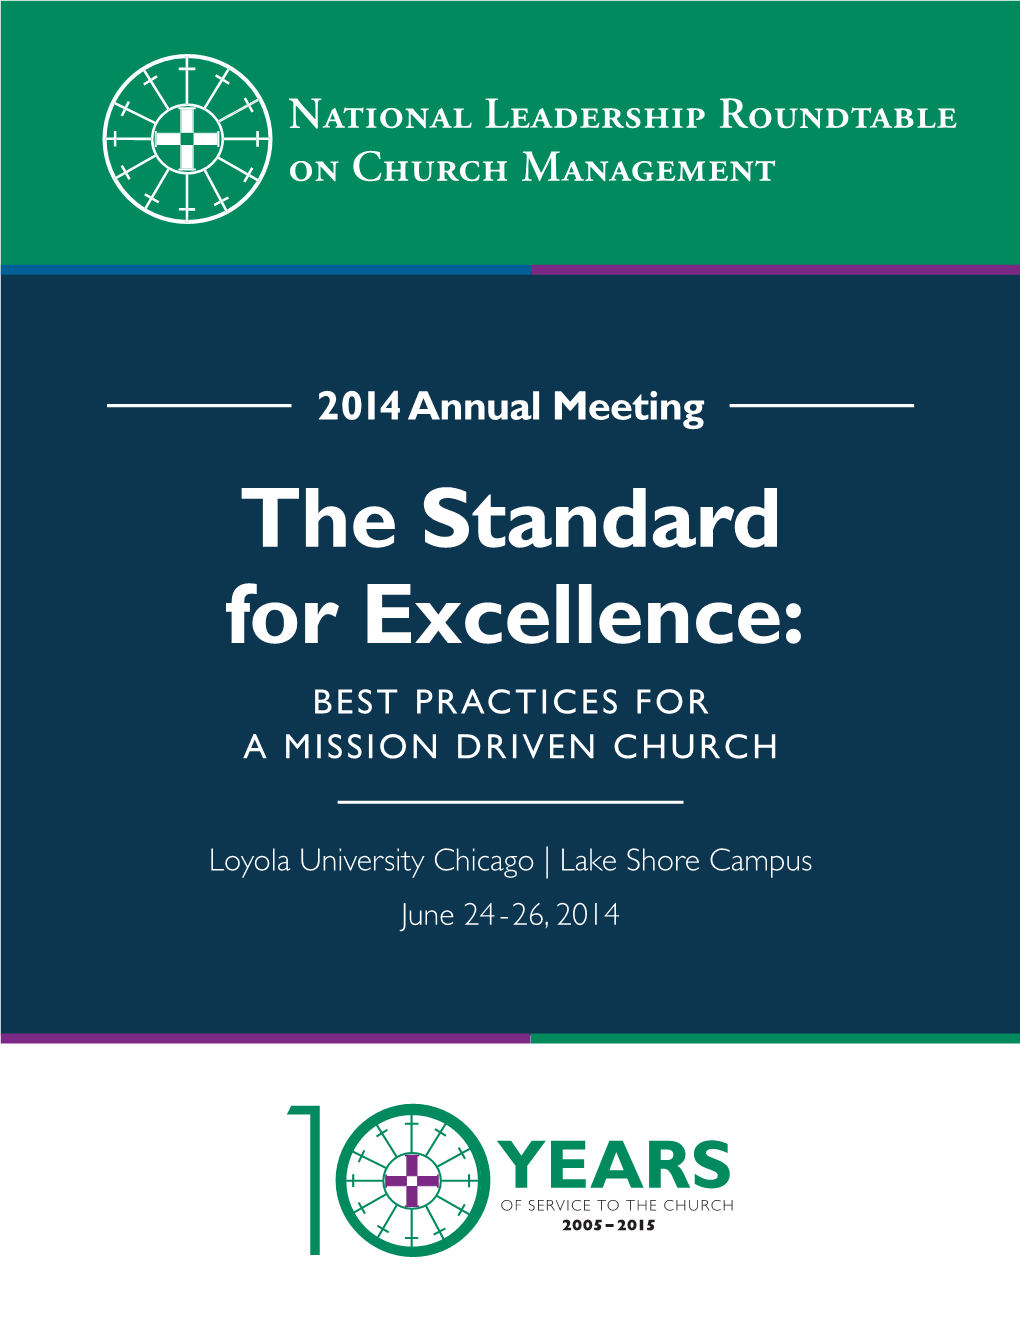 The Standard for Excellence: Best Practices for a Mission Driven Church